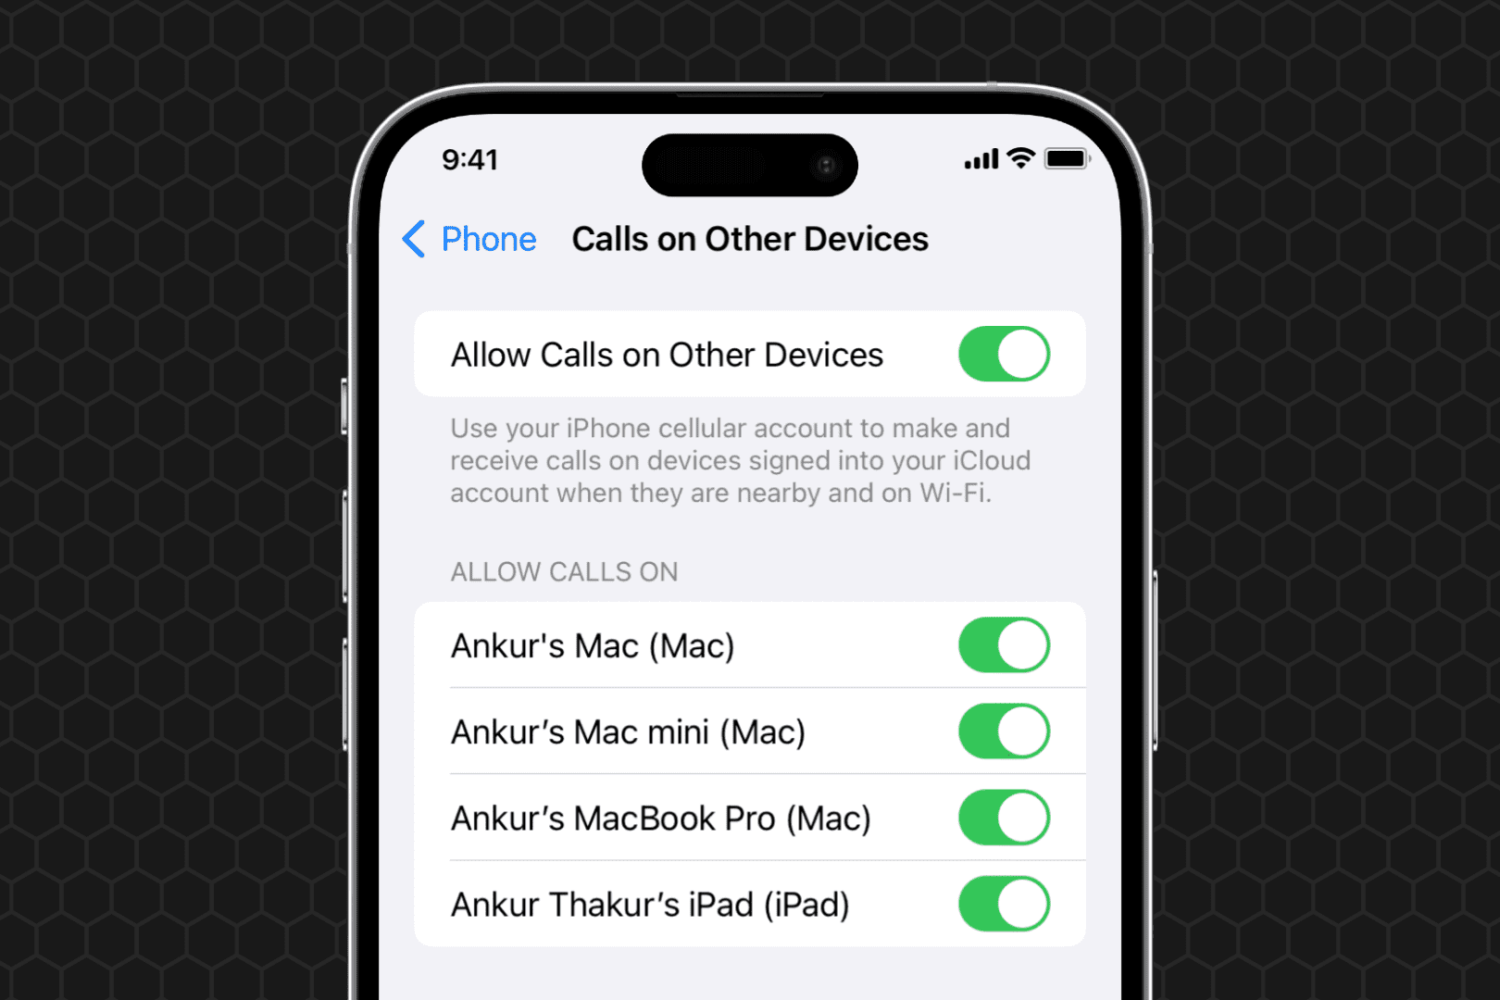 Allow Calls on Other Devices in iPhone settings